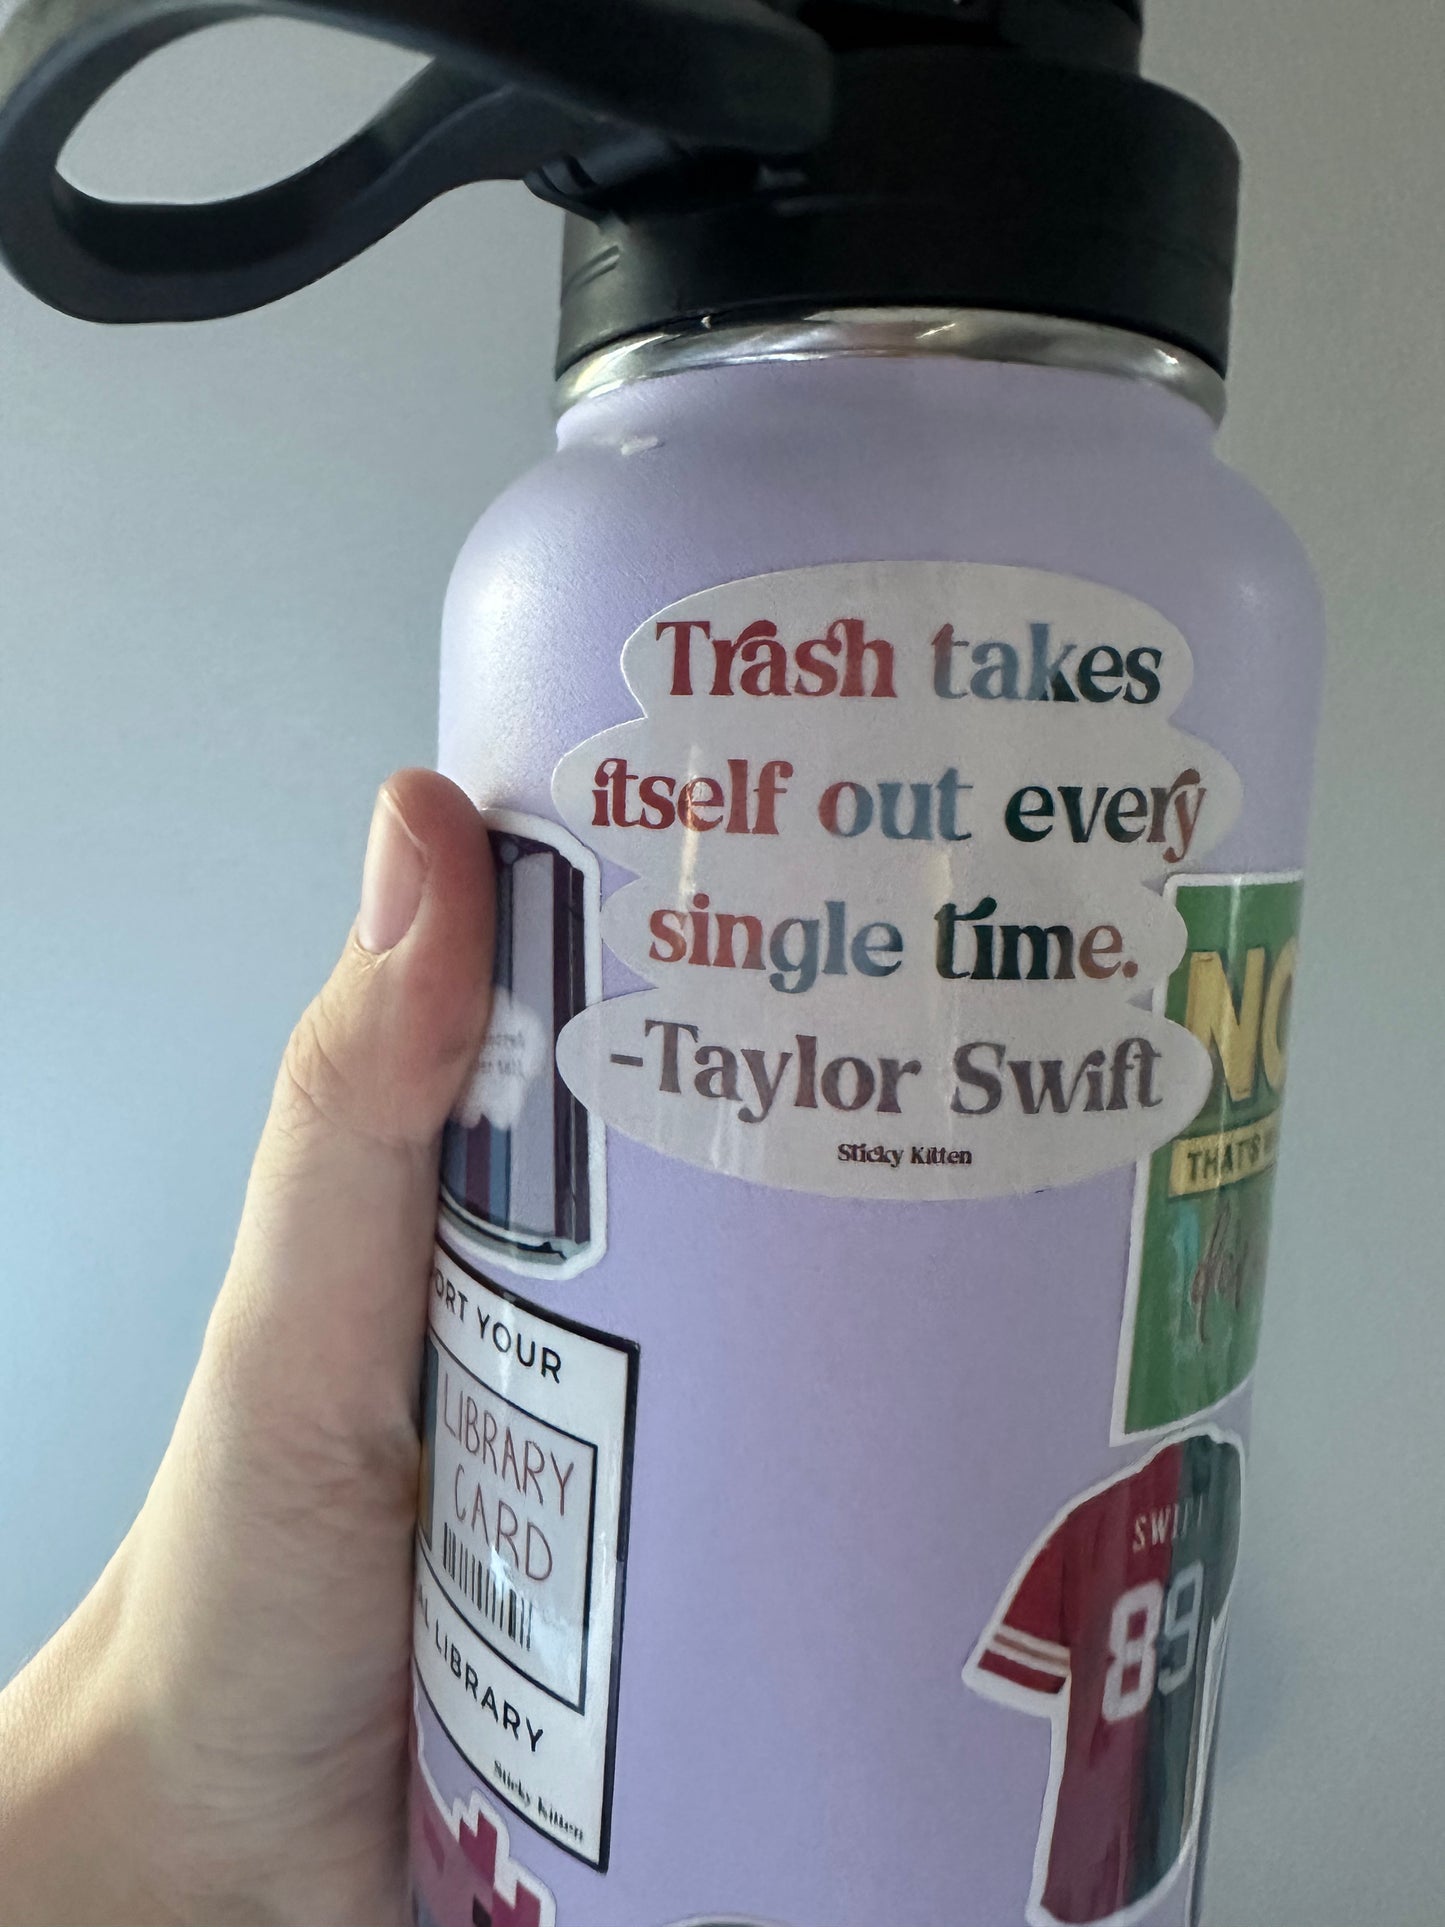 Trash Takes Itself Out Every Single Time -- Taylor Swift Sticker